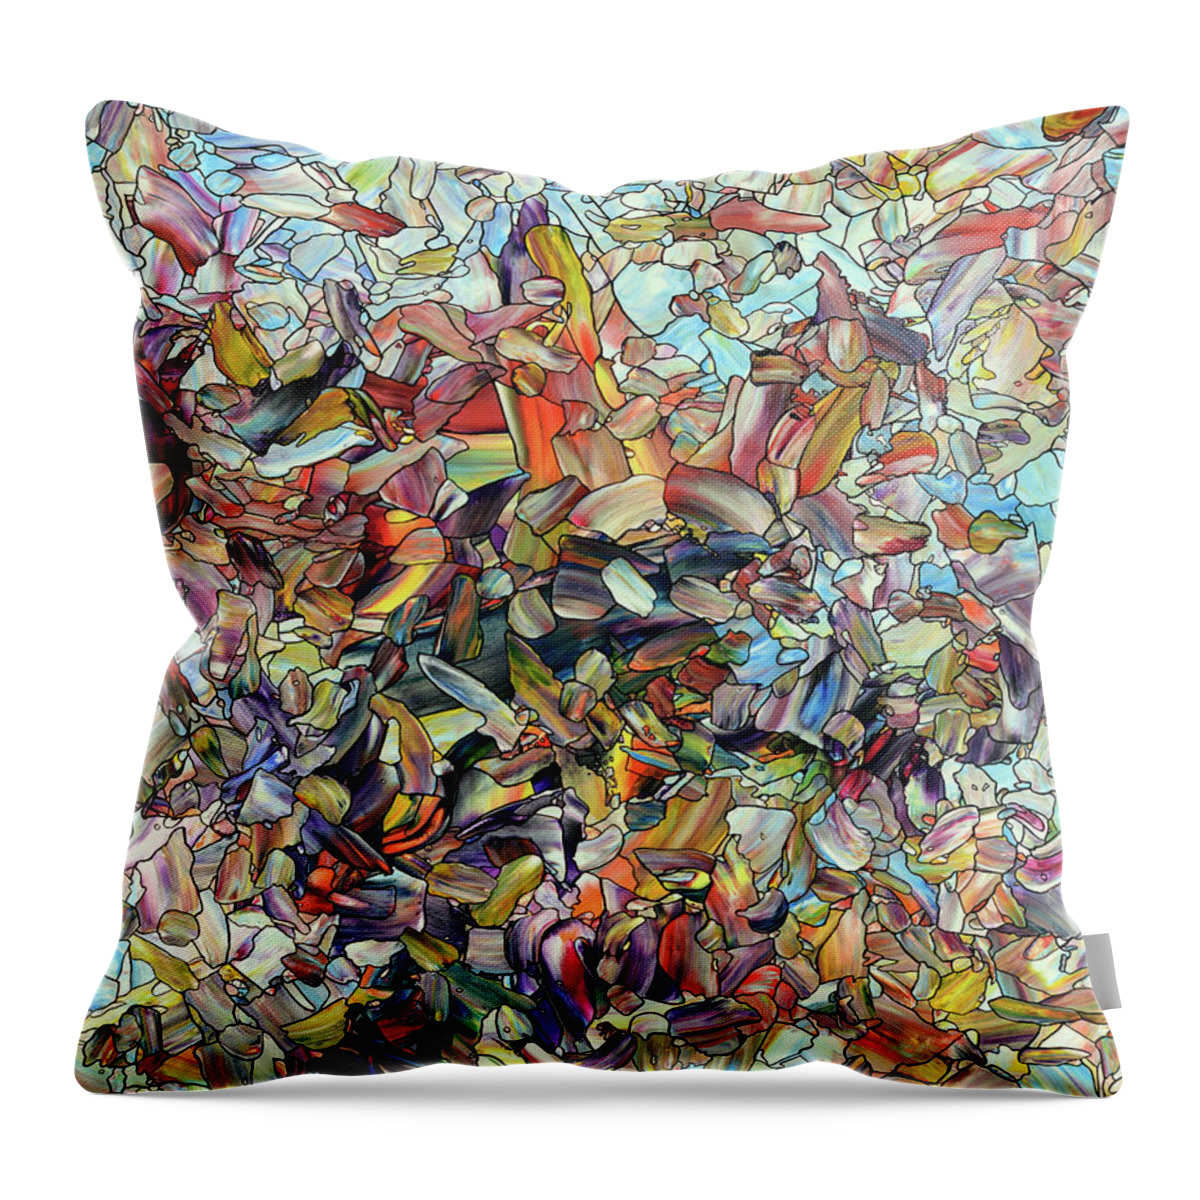 Abstract Throw Pillow featuring the painting Fragmented Horse 40 x 48 by James W Johnson